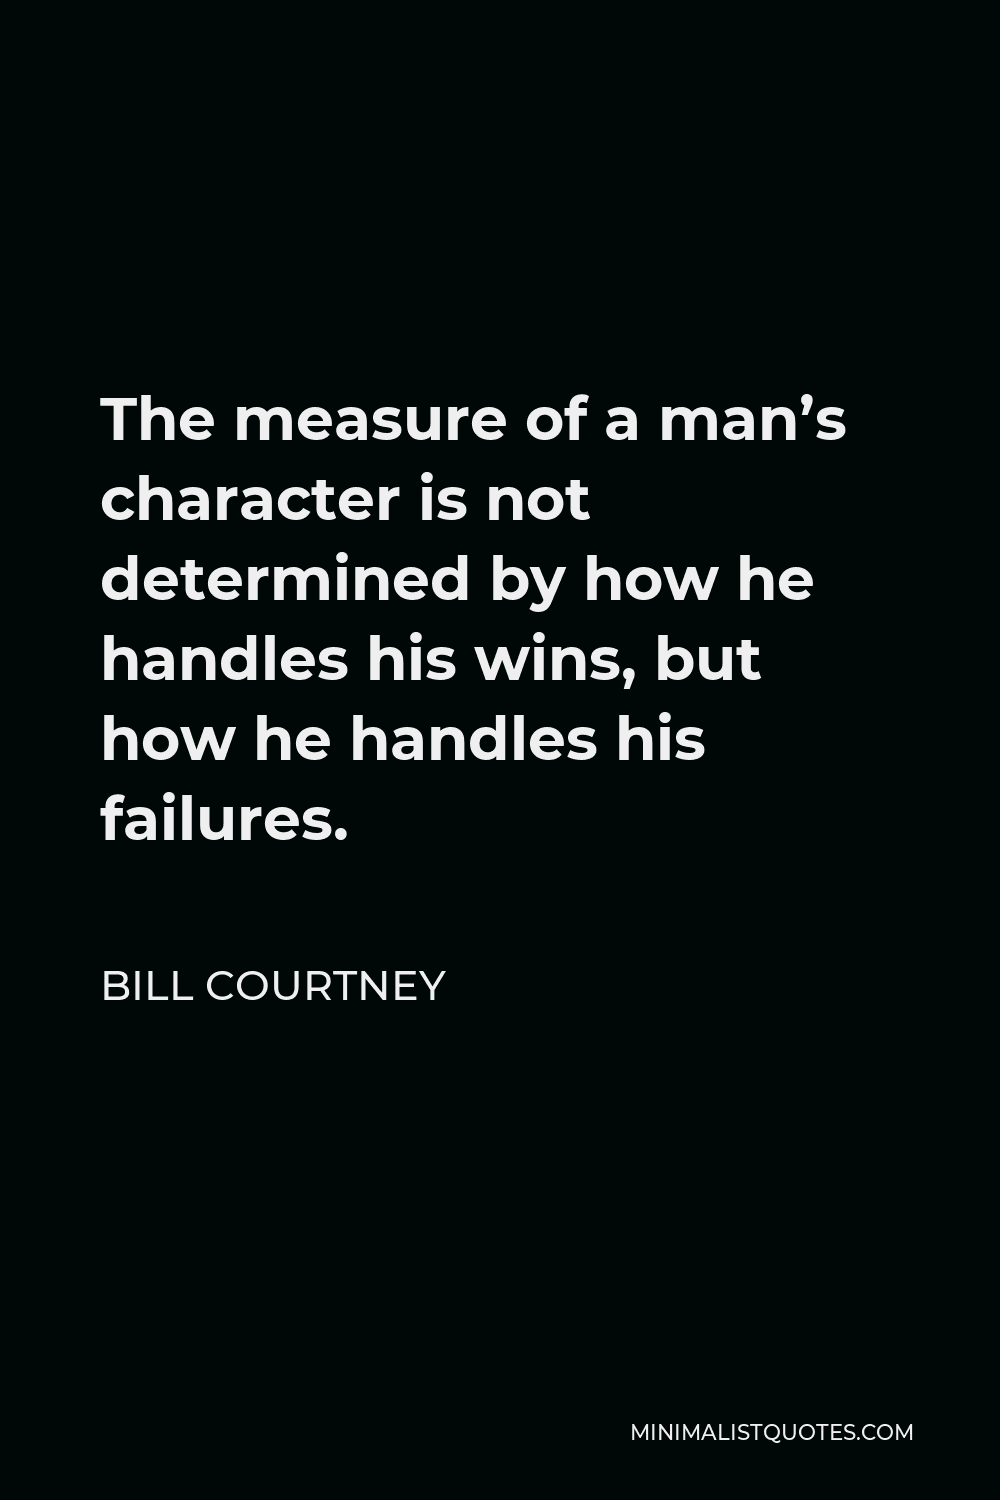 Bill Courtney Quote - The measure of a man’s character is not determined by how he handles his wins, but how he handles his failures.